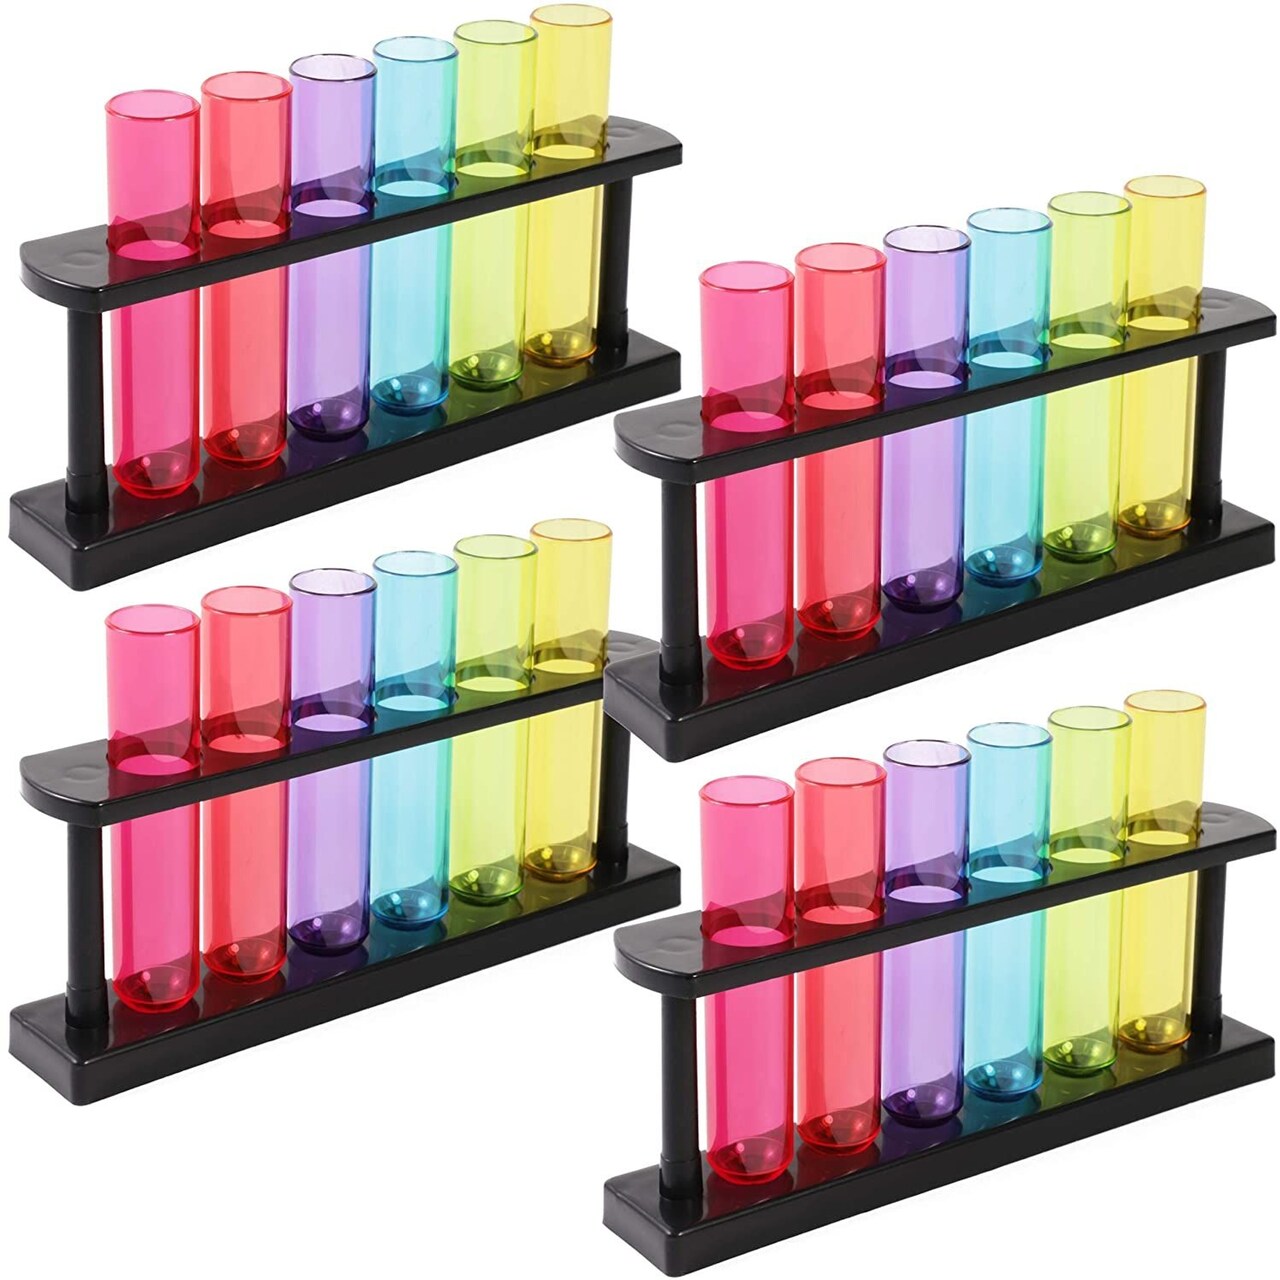 4 Pack Plastic Test Tubes with Rack for Parties, Plant Propagation, Shot Glasses Holder for Science Themed Birthday Party, Pouring and Storing Liquids, 6 Colors (1.5 ounces)